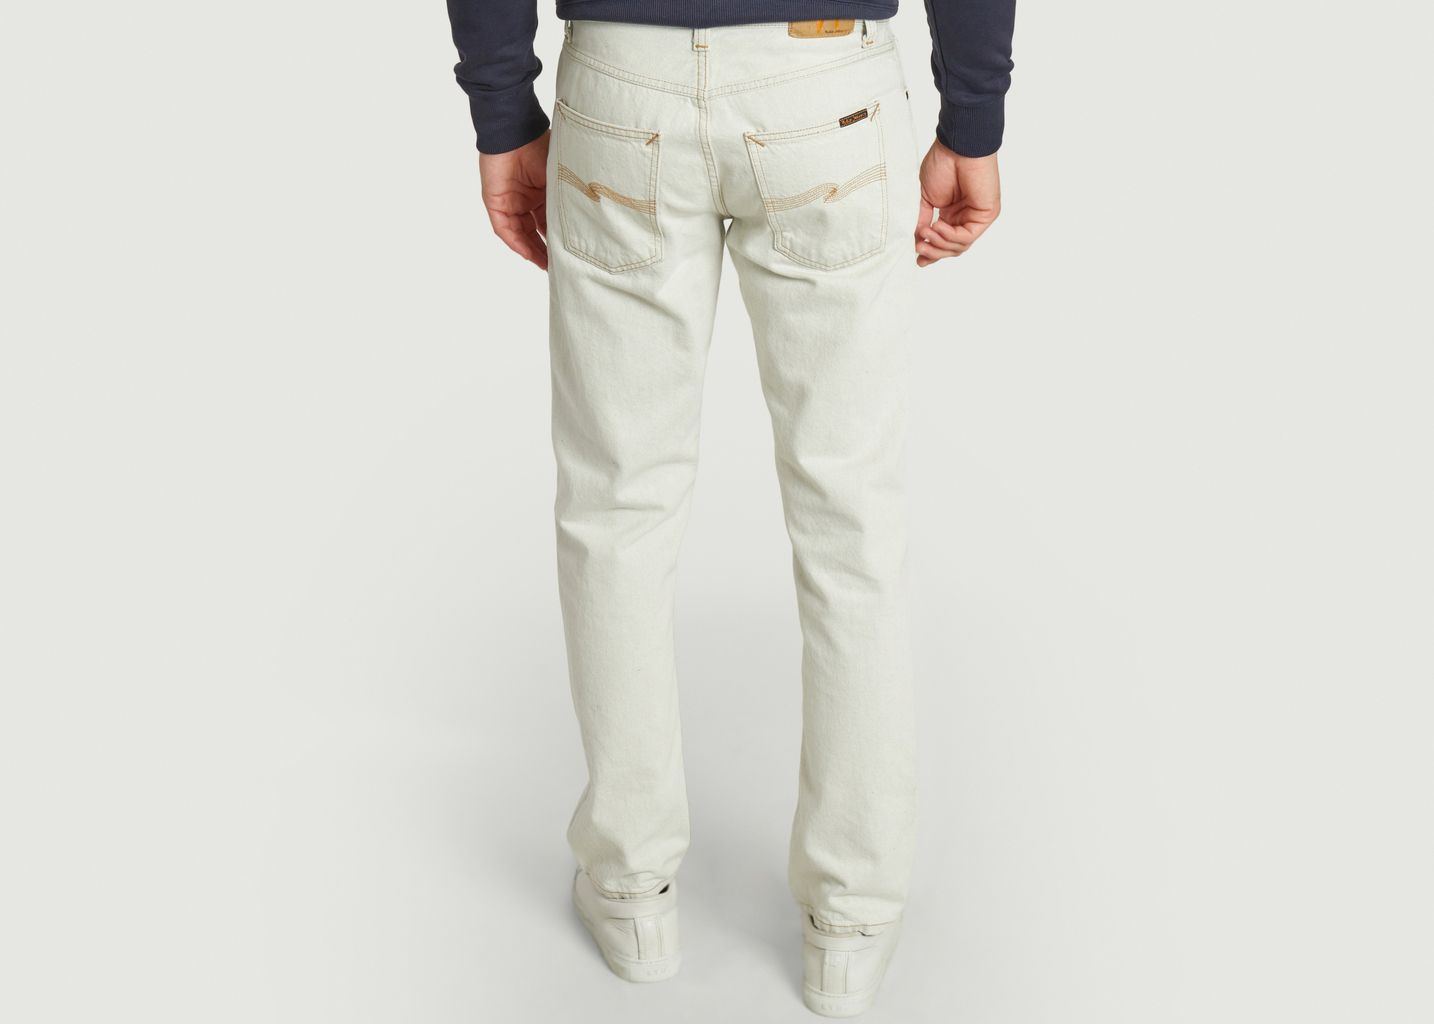 Jeans Gritty Jackson - Nudie Jeans